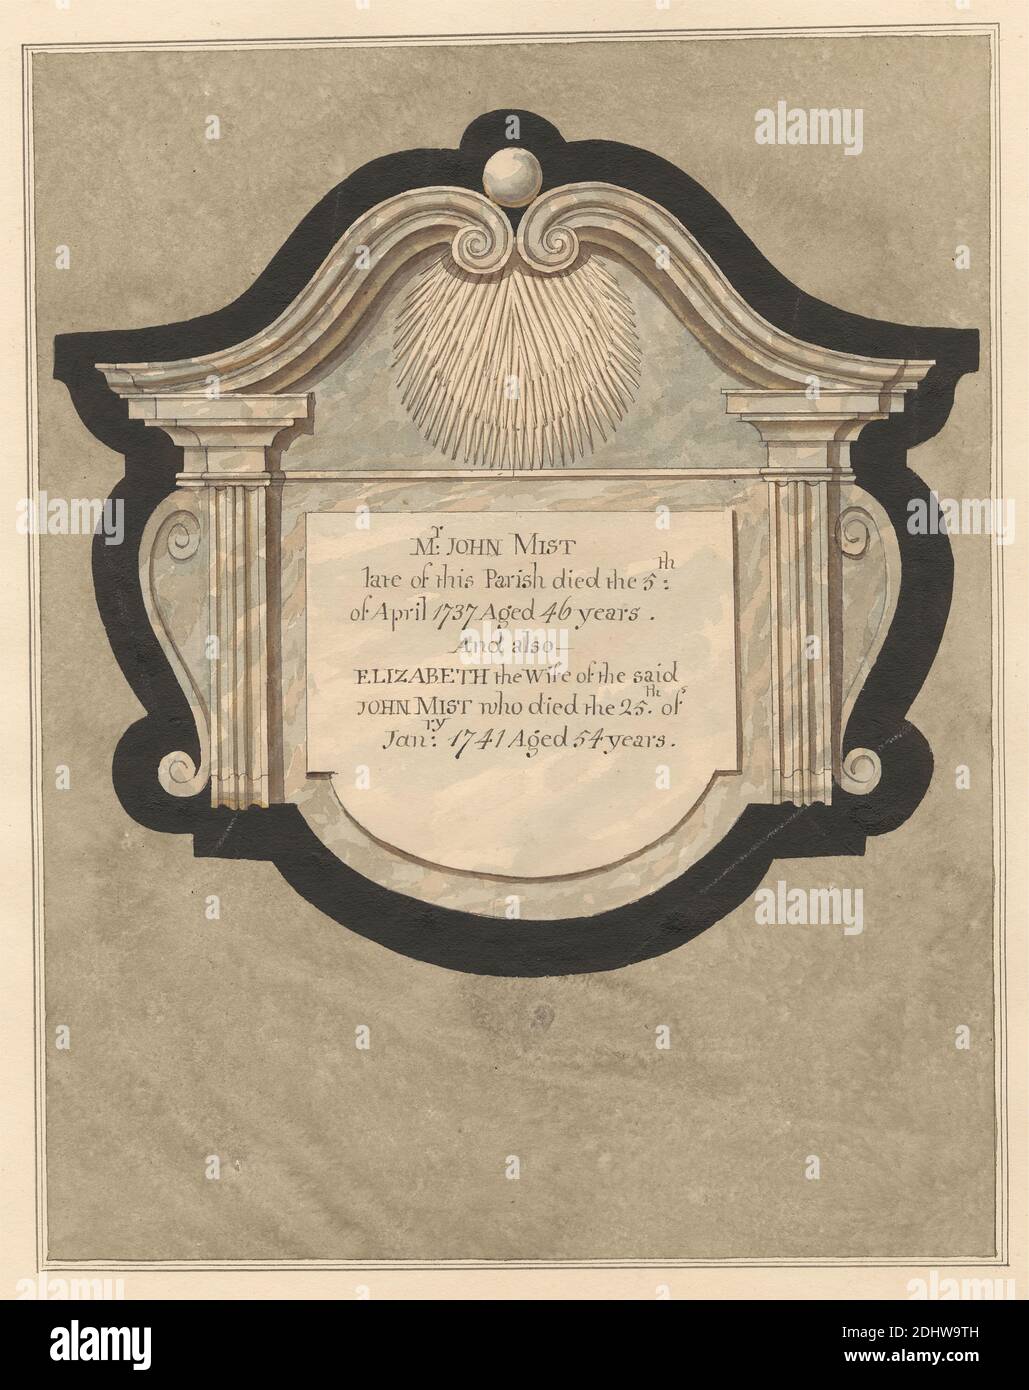 Memorial to John Mist and his wife Elizabeth from Hillingdon Church, Daniel Lysons, 1762–1834, British, between 1796 and 1811, Pen and black ink and watercolor over graphite on medium, slightly textured, cream wove paper, Sheet: 14 7/8 × 10 1/2 inches (37.8 × 26.7 cm), architectural subject, church, memorial, Church of St John the Baptist, England, Greater London, Hillingdon, London, United Kingdom Stock Photo